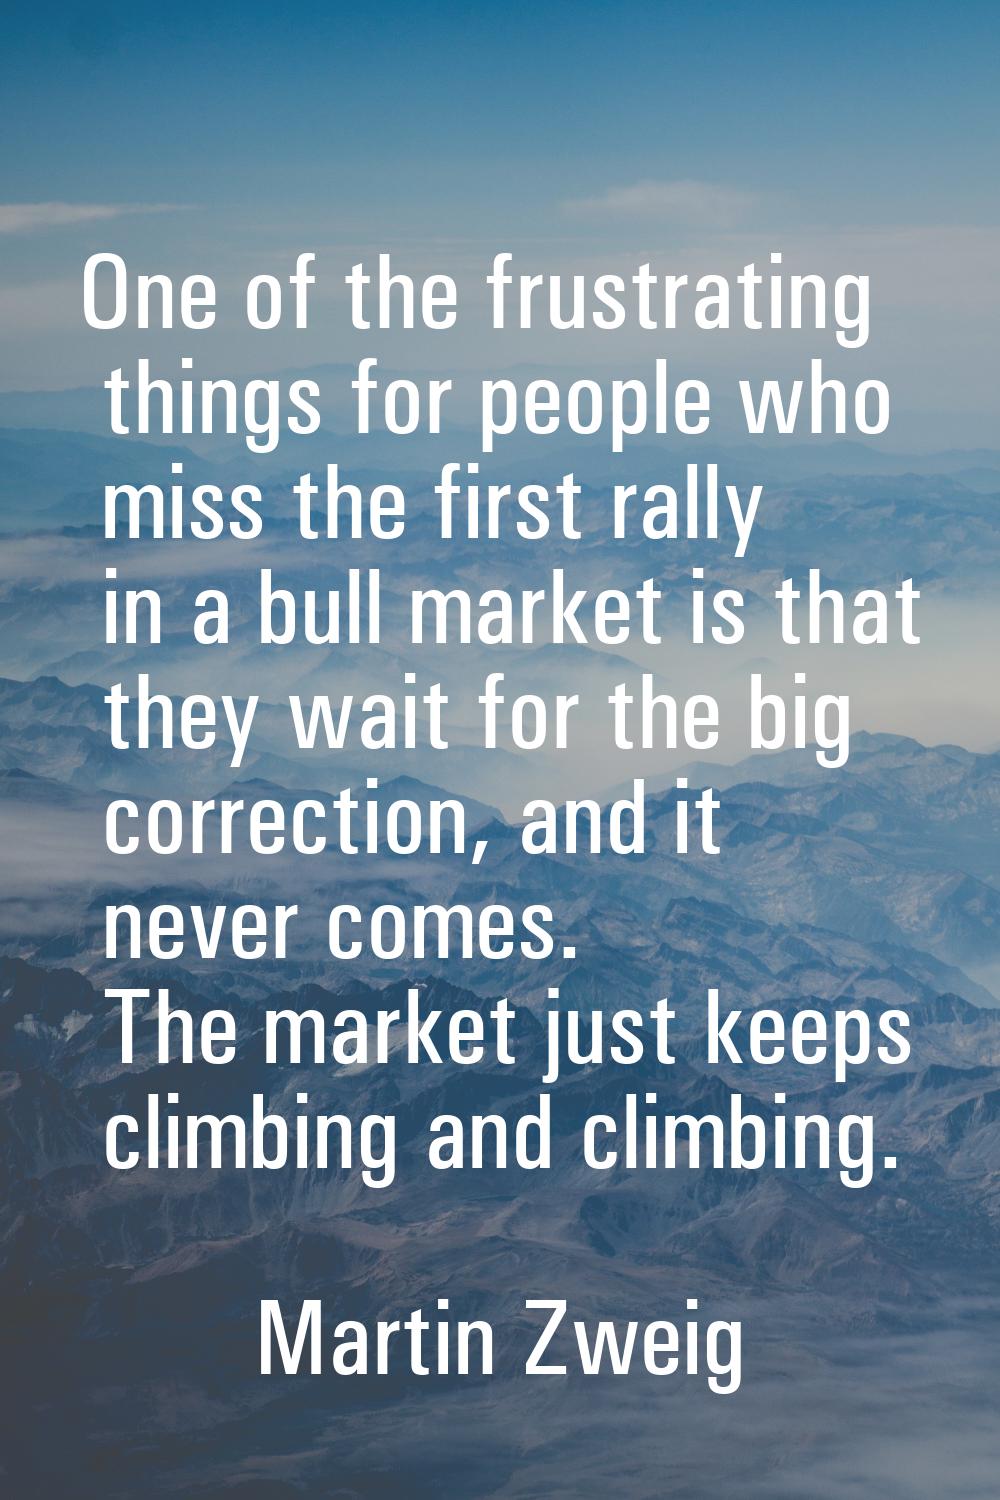 One of the frustrating things for people who miss the first rally in a bull market is that they wai